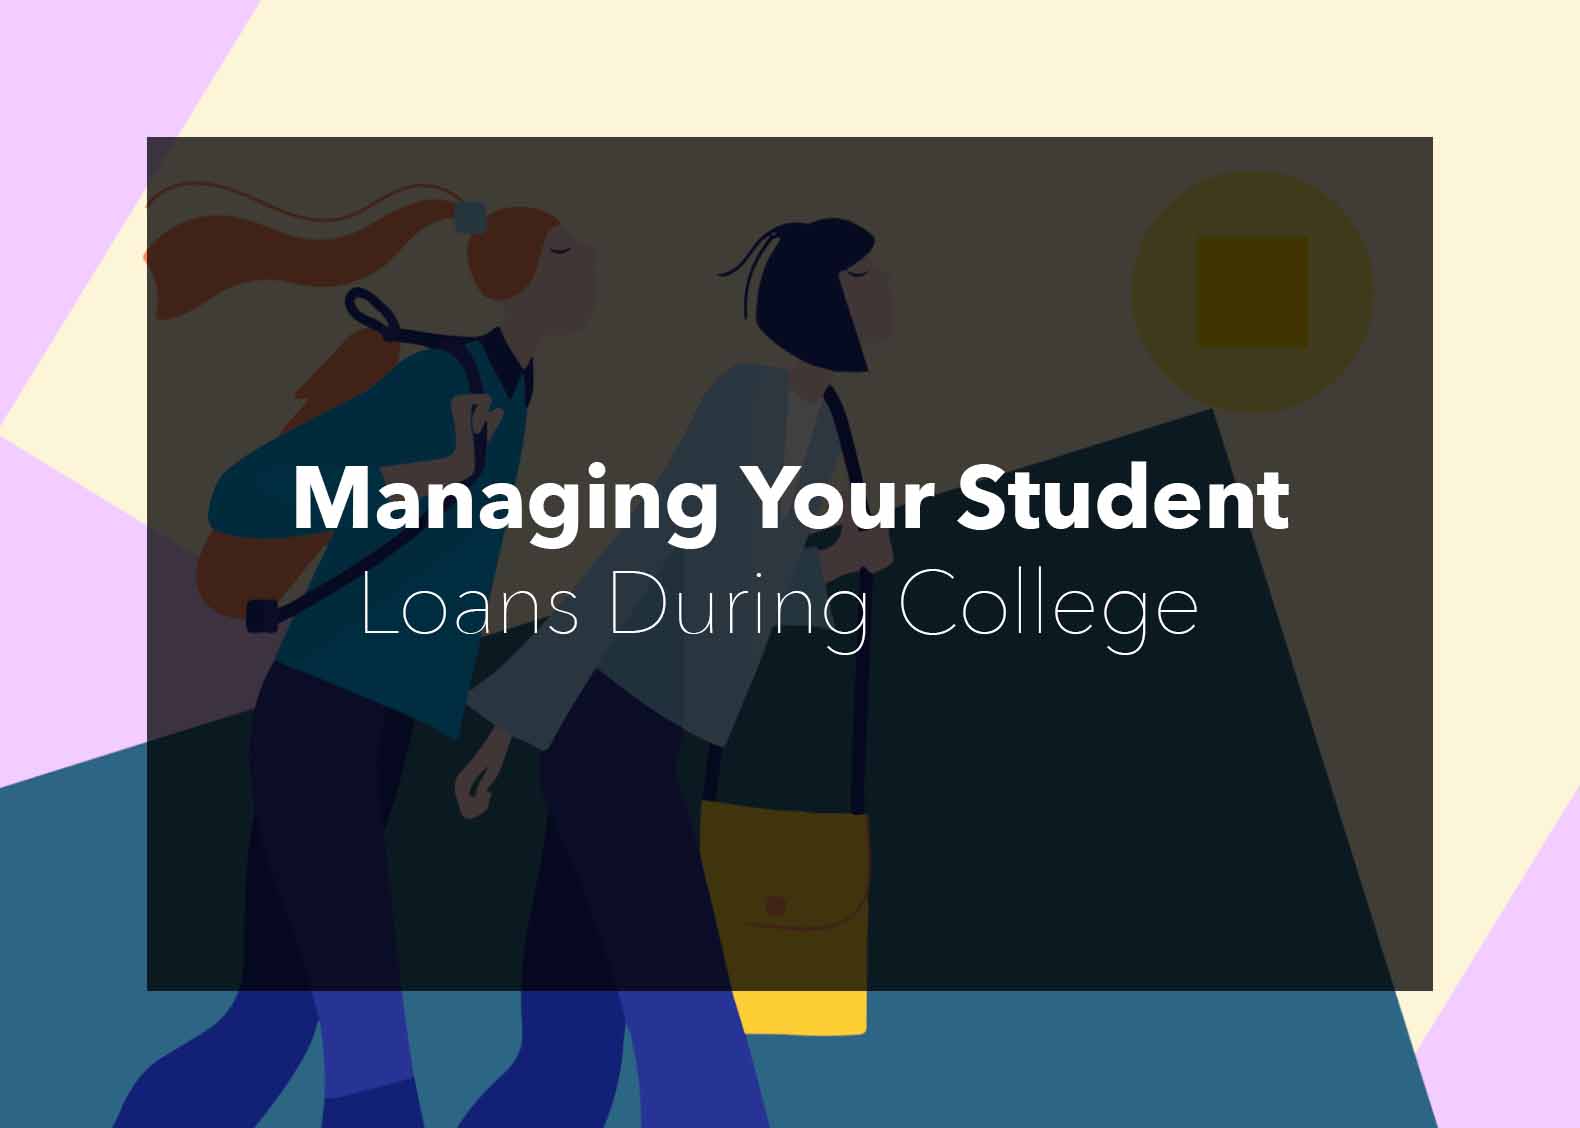 Managing Your Student Loans During College